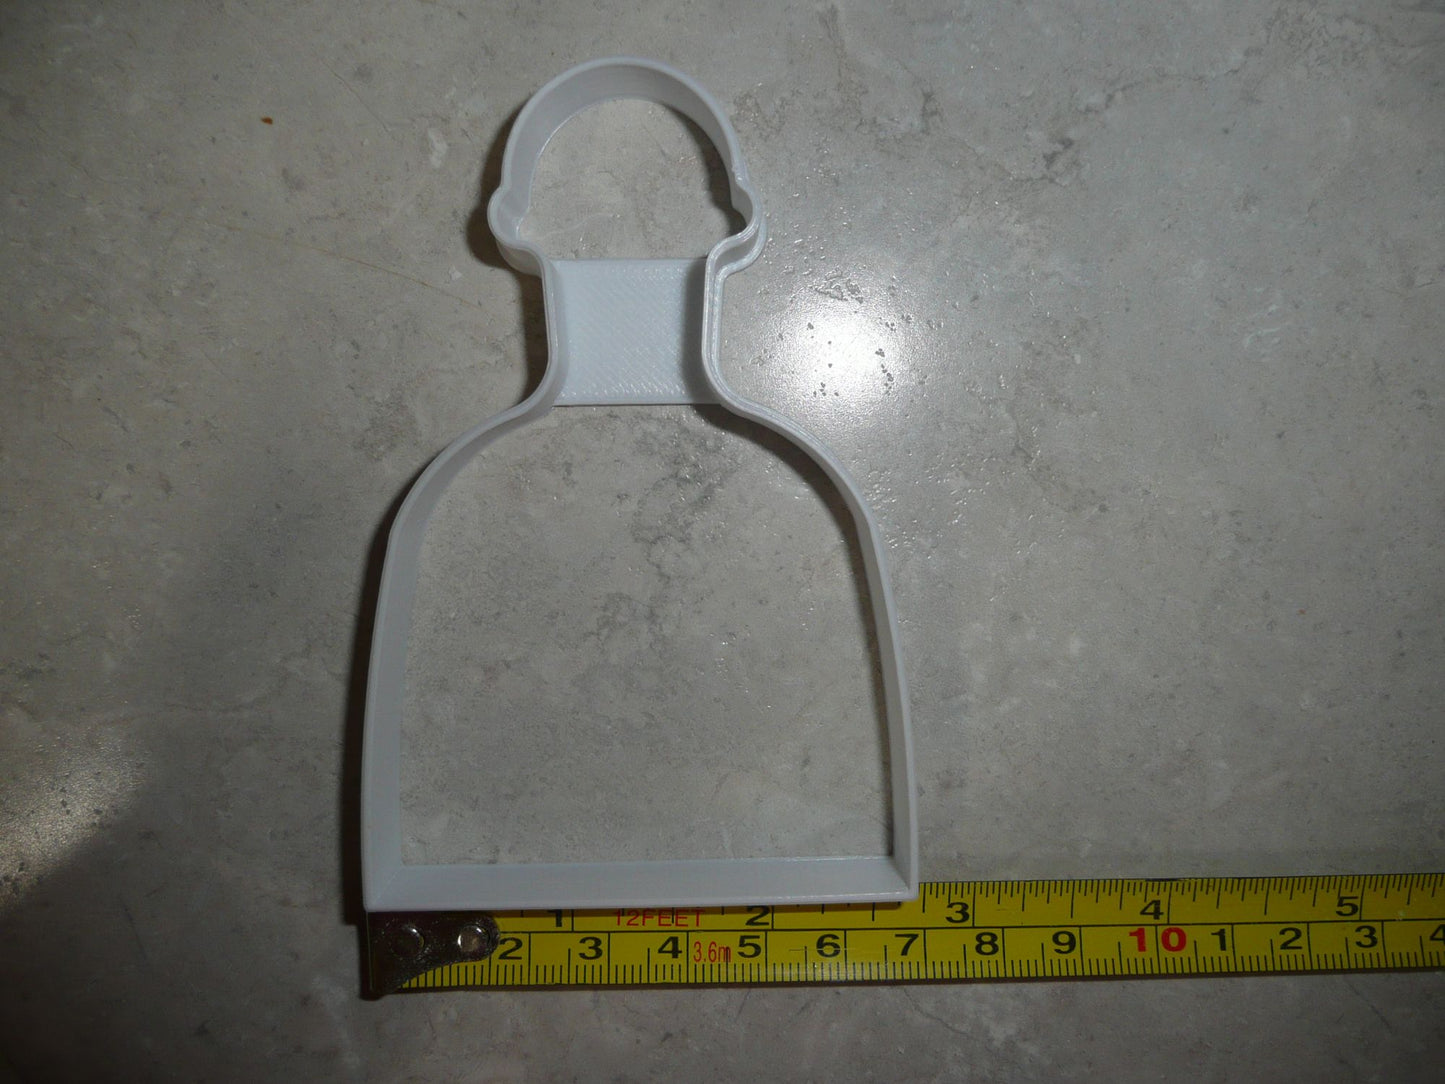 Tequila Bottle Alcohol Drink Shot Glass Mexico Cookie Cutter USA PR2862